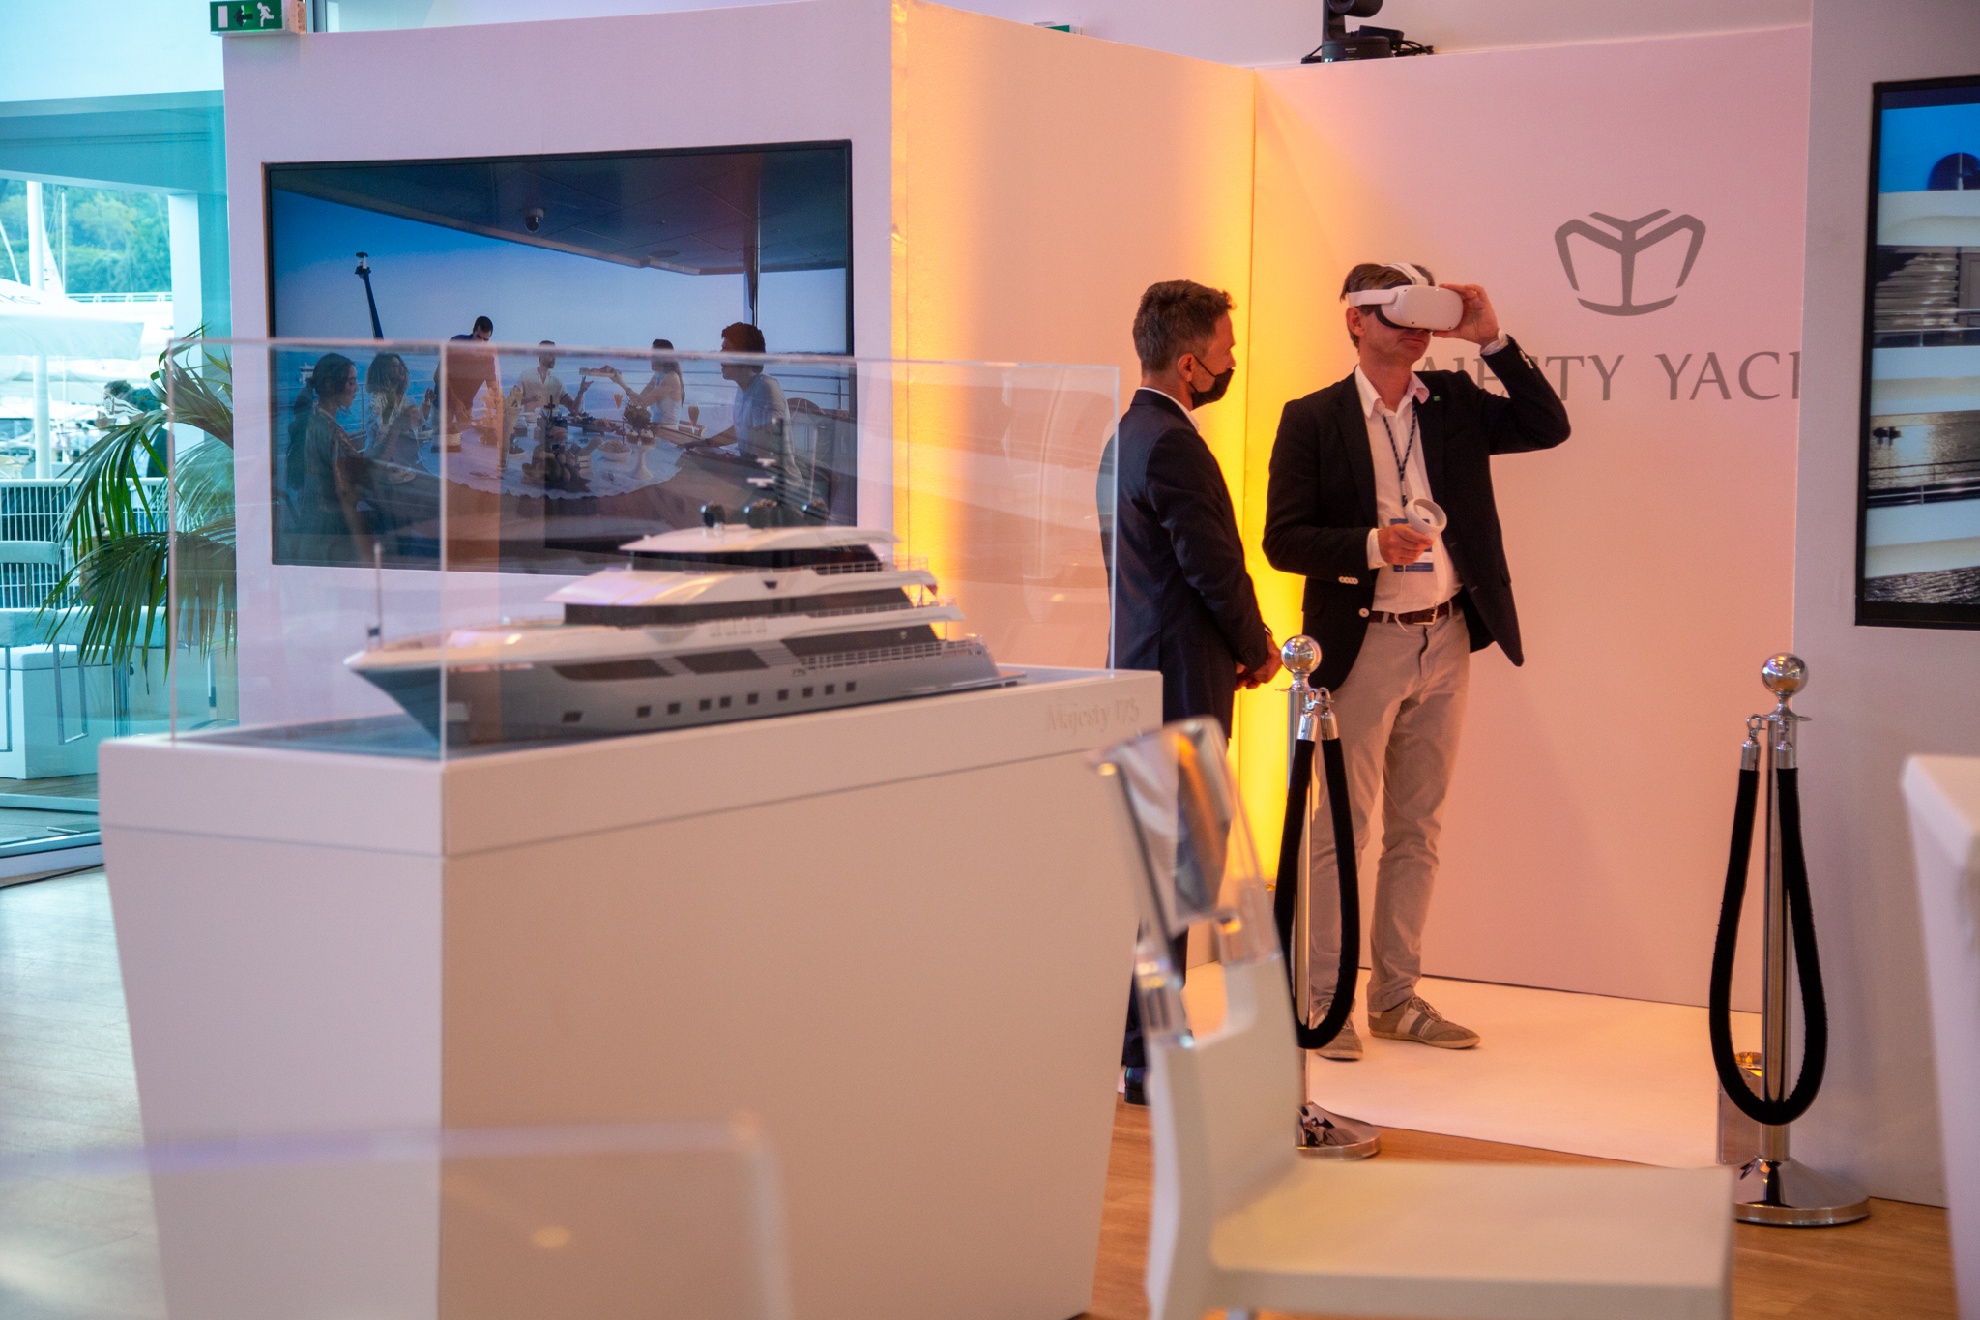 Future of Superyachts Panel Discussion at Monaco Yacht Show - Gulf Craft 2021 6-1